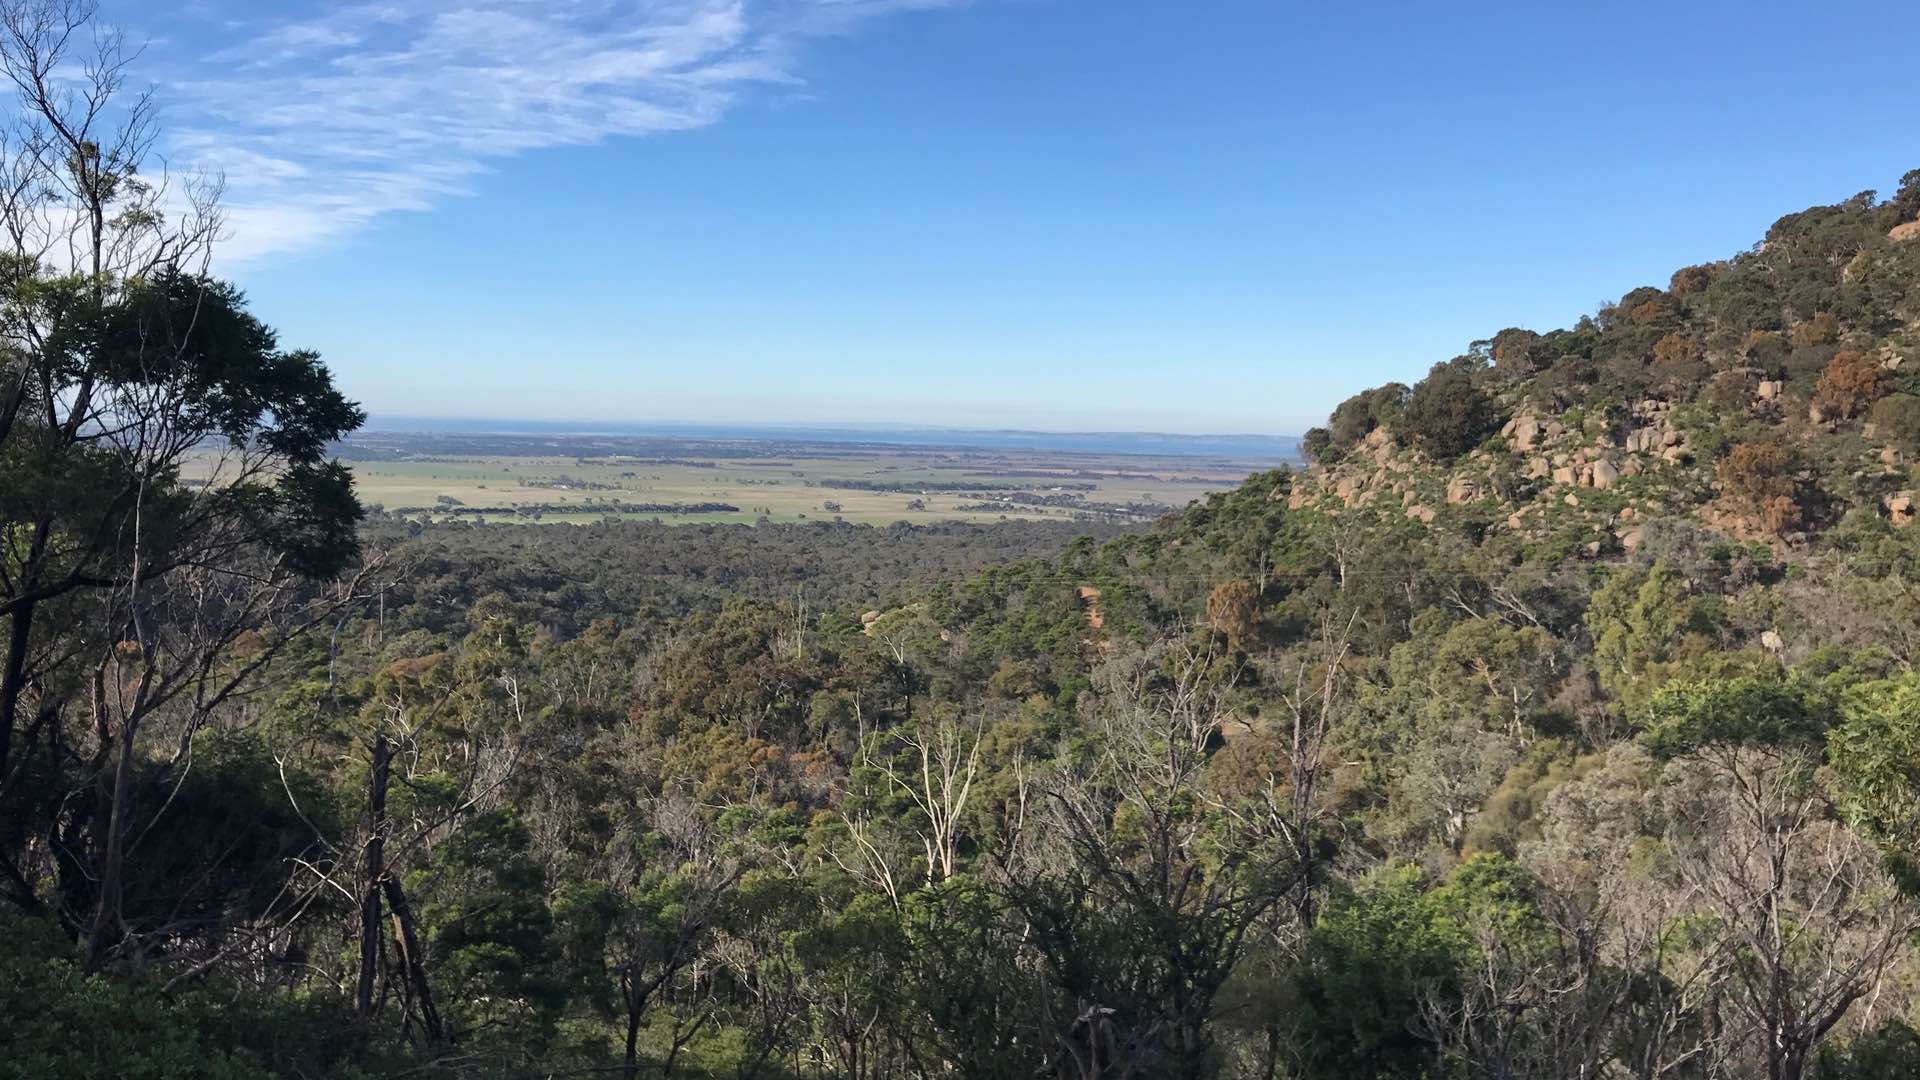 Six Victorian Hiking Adventures That Will Get You Out of the City This Summer